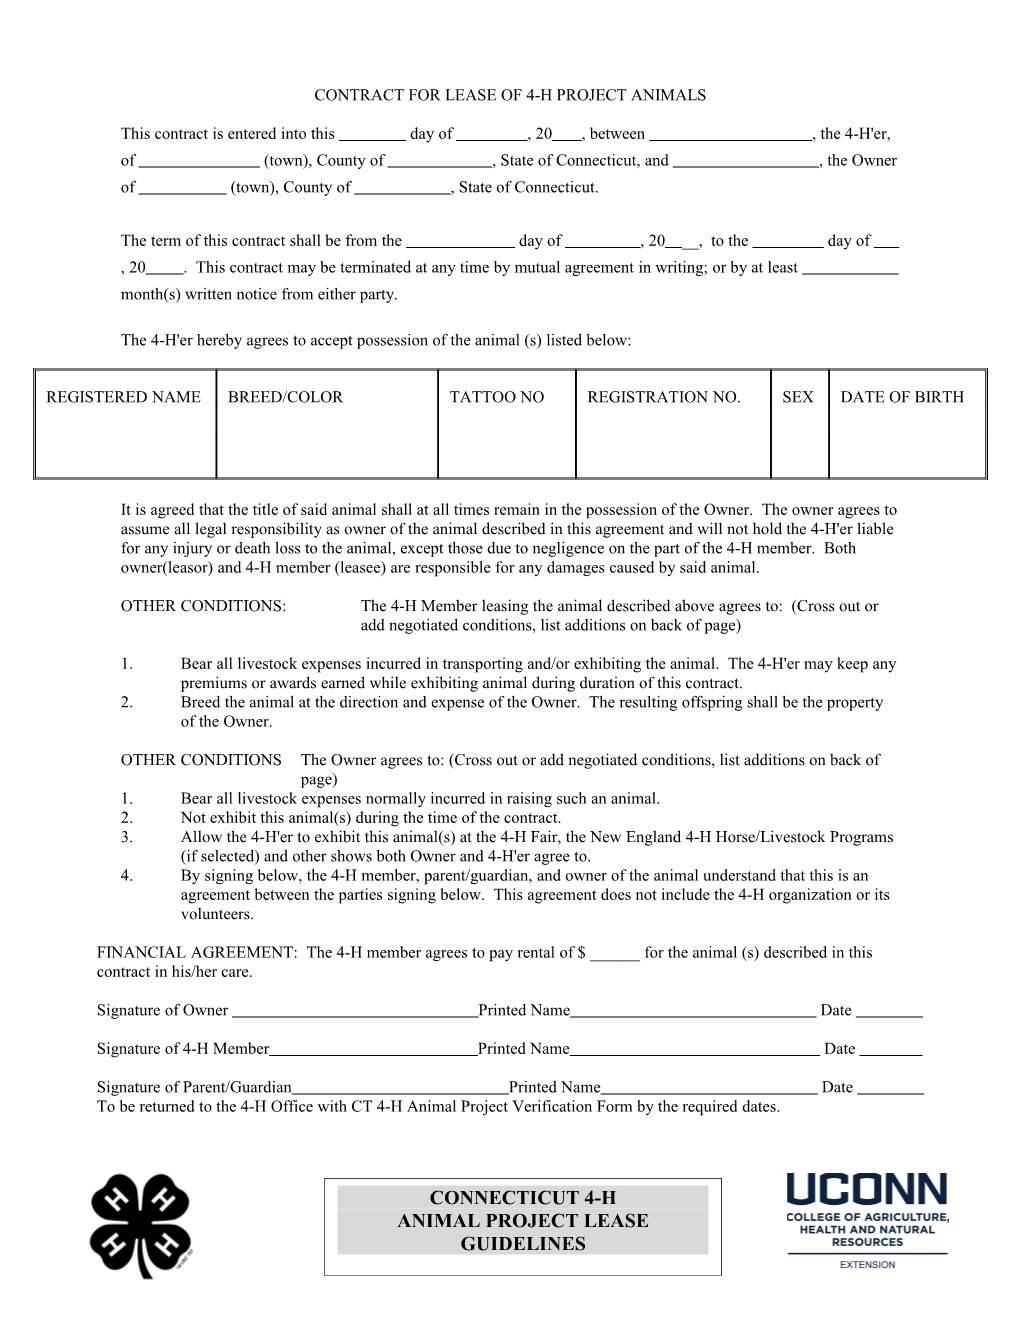 Contract for Lease of 4-H Project Animals